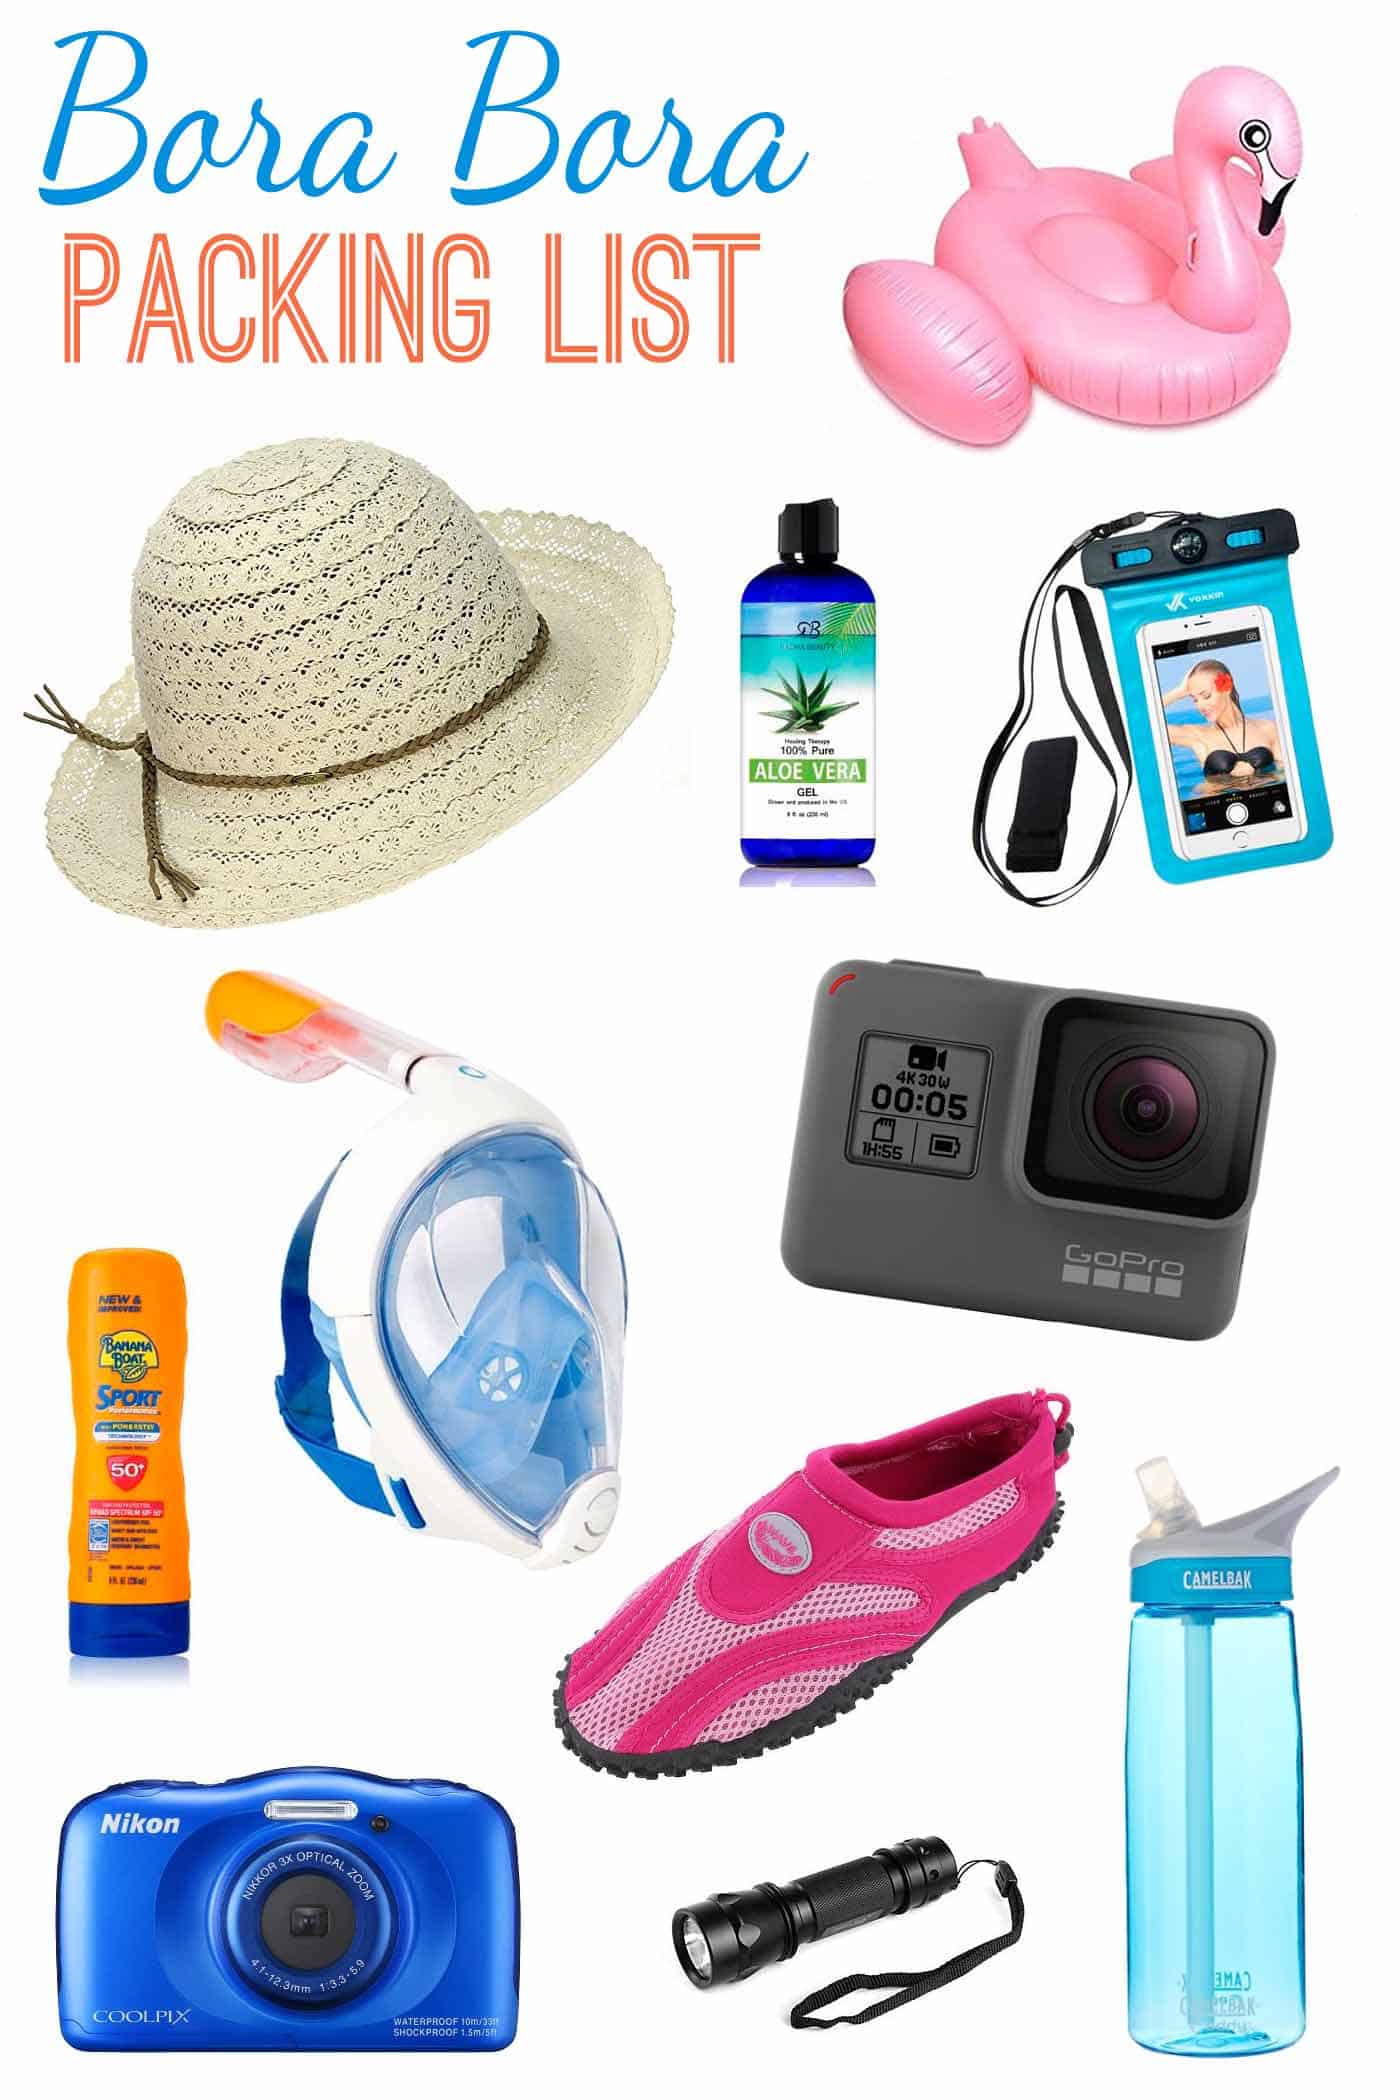 What to pack for bora bora trip.